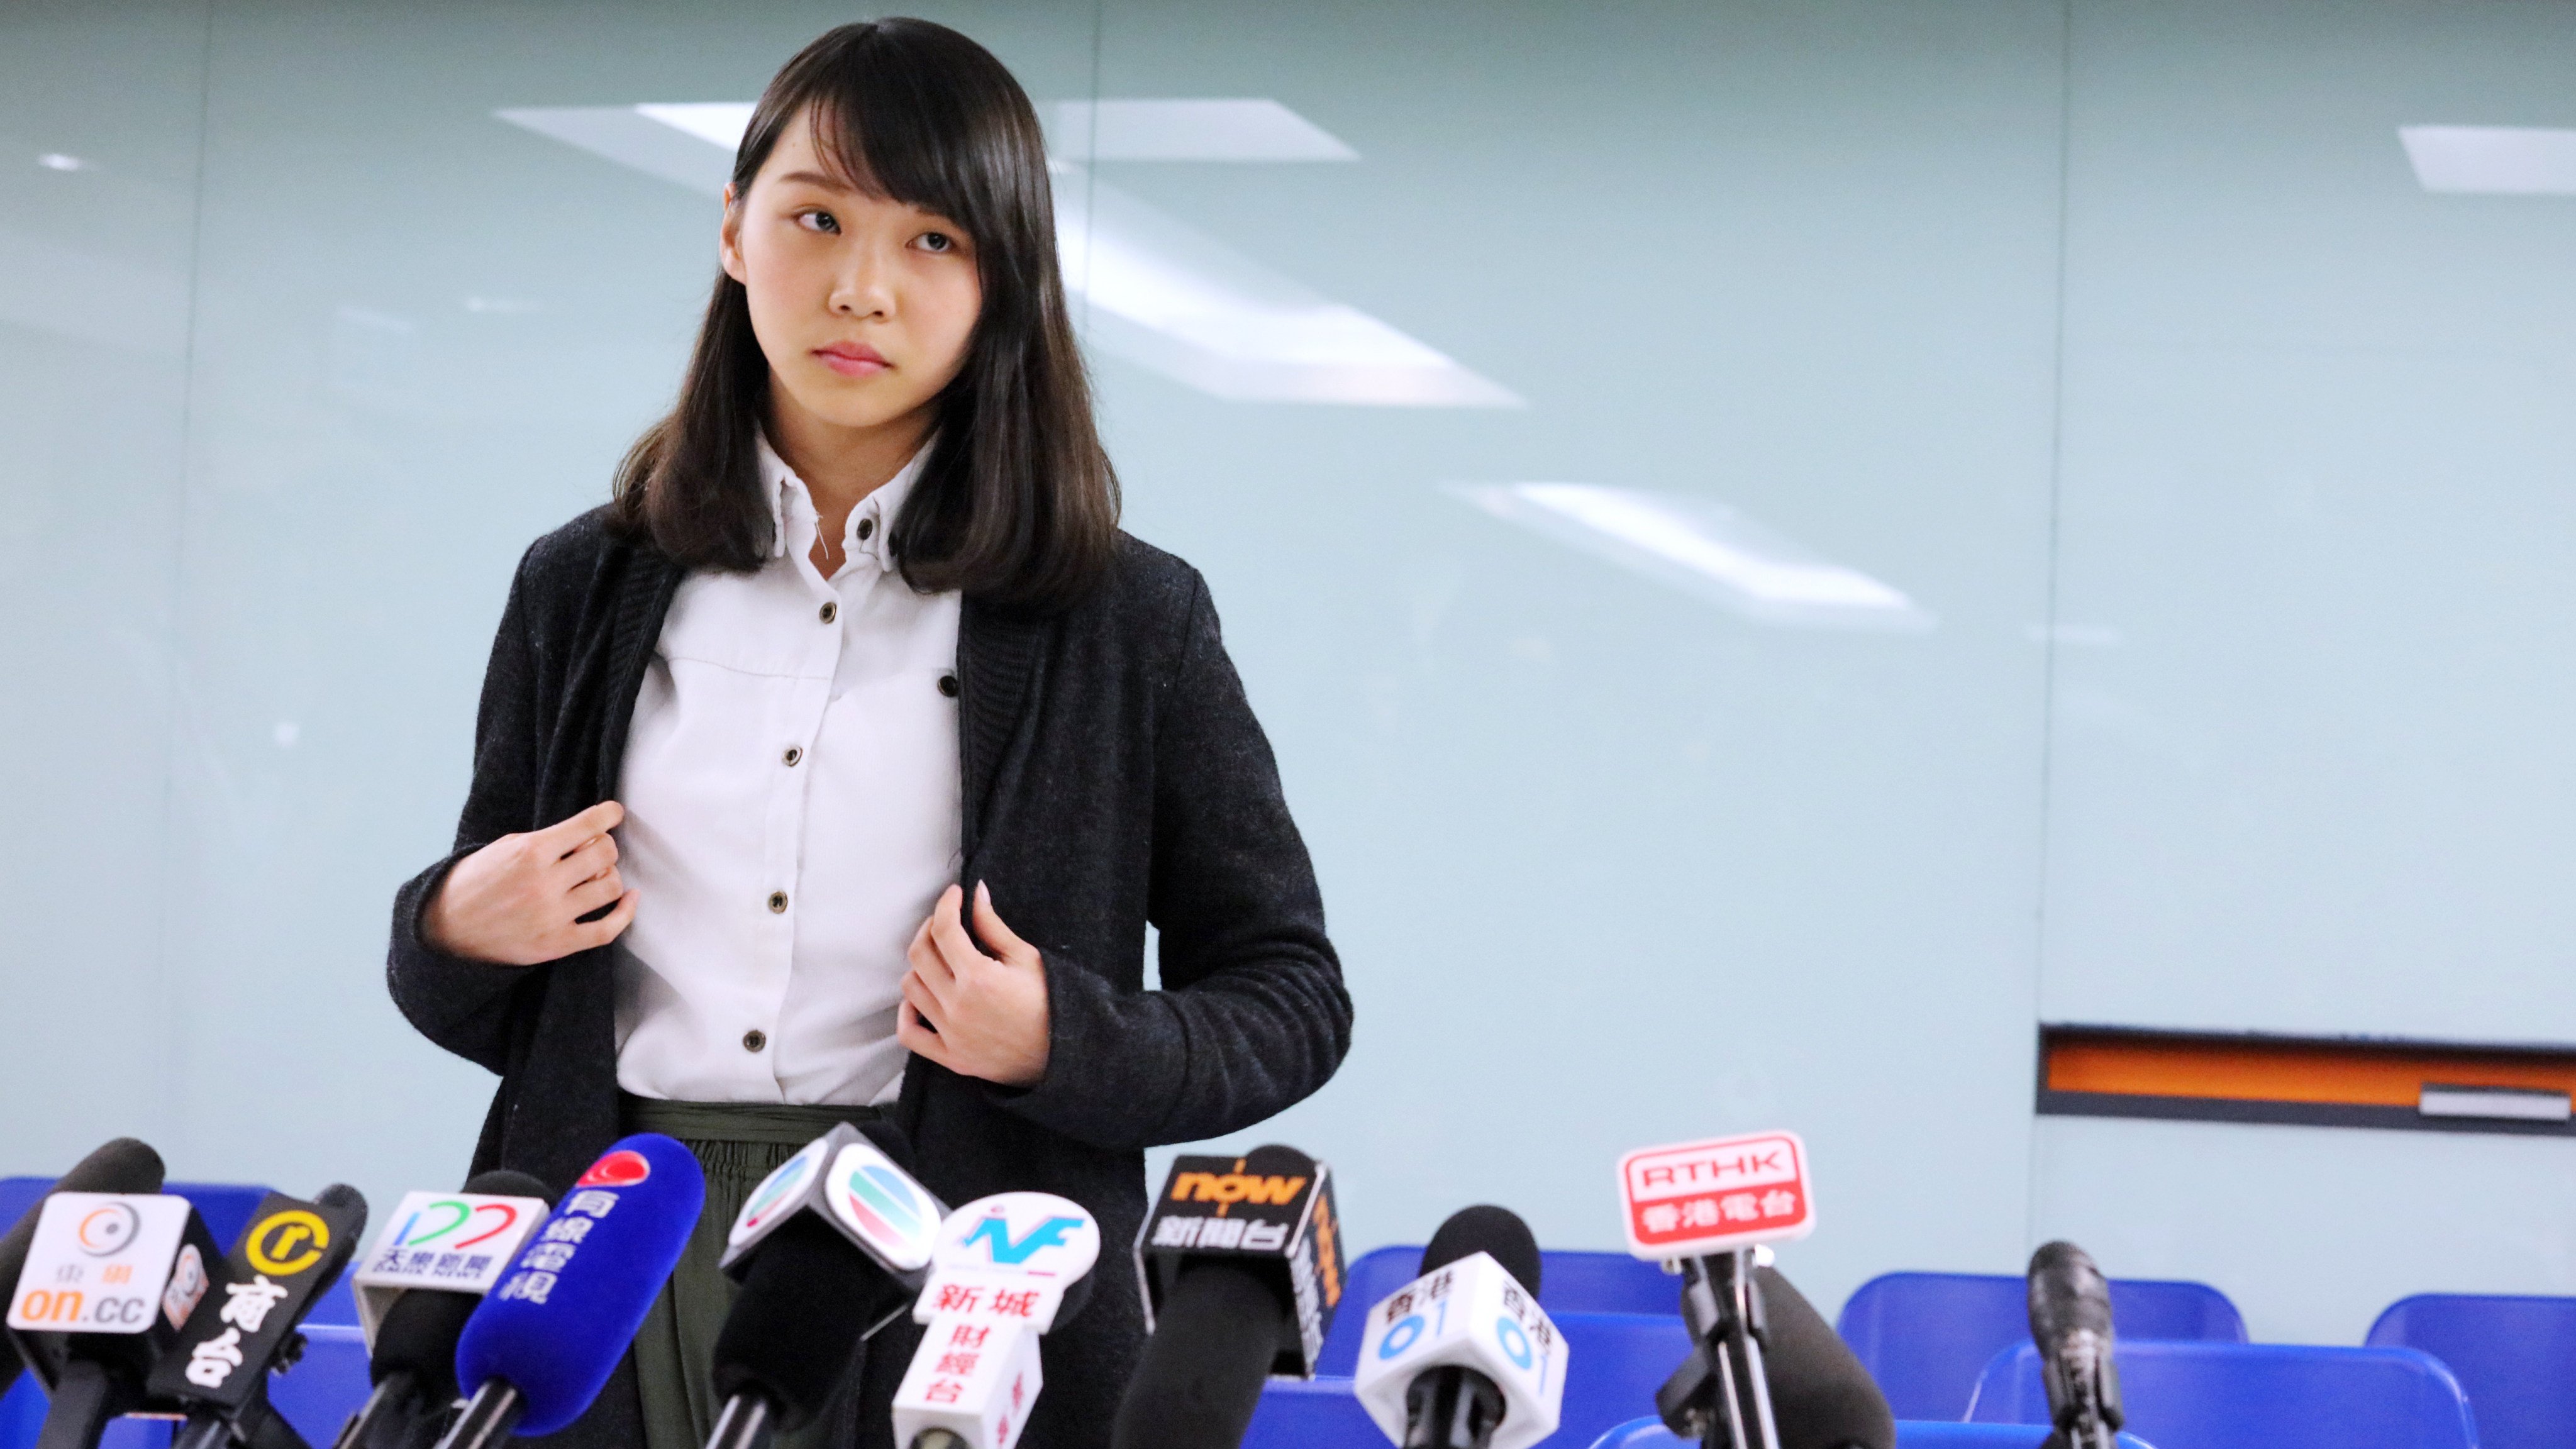 Activist Agnes Chow at a press conference in 2018. She earlier highlighted Hong Kong’s political situation, fears for her safety and a deterioration in her mental health as justification for not returning to the city. Photo: Felix Wong